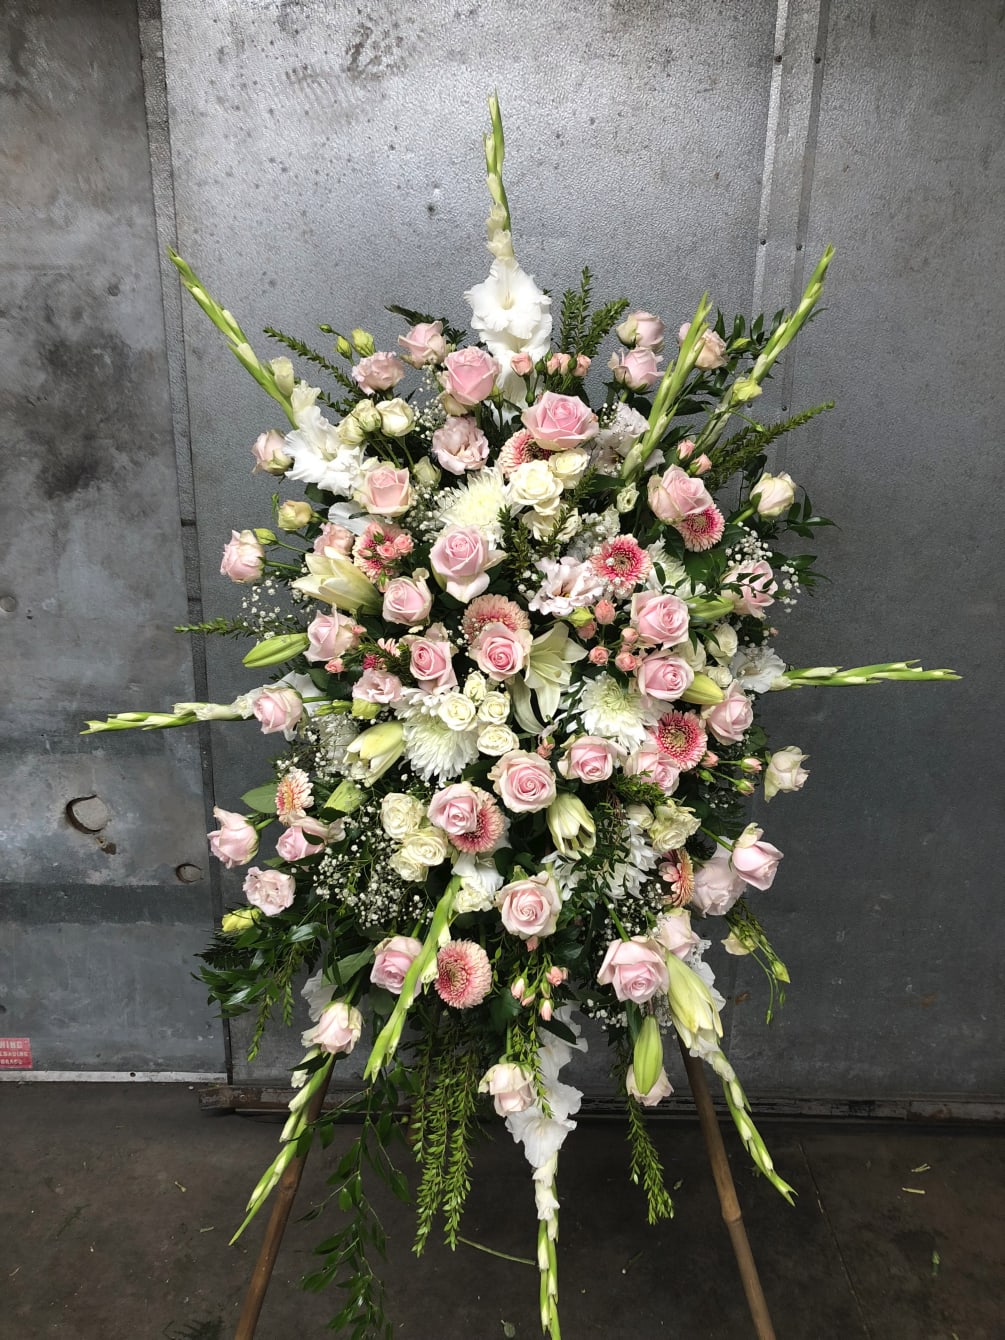 Roses, Gladiolas, Lilies, and Gerberas fill this Large Spray with an abundance